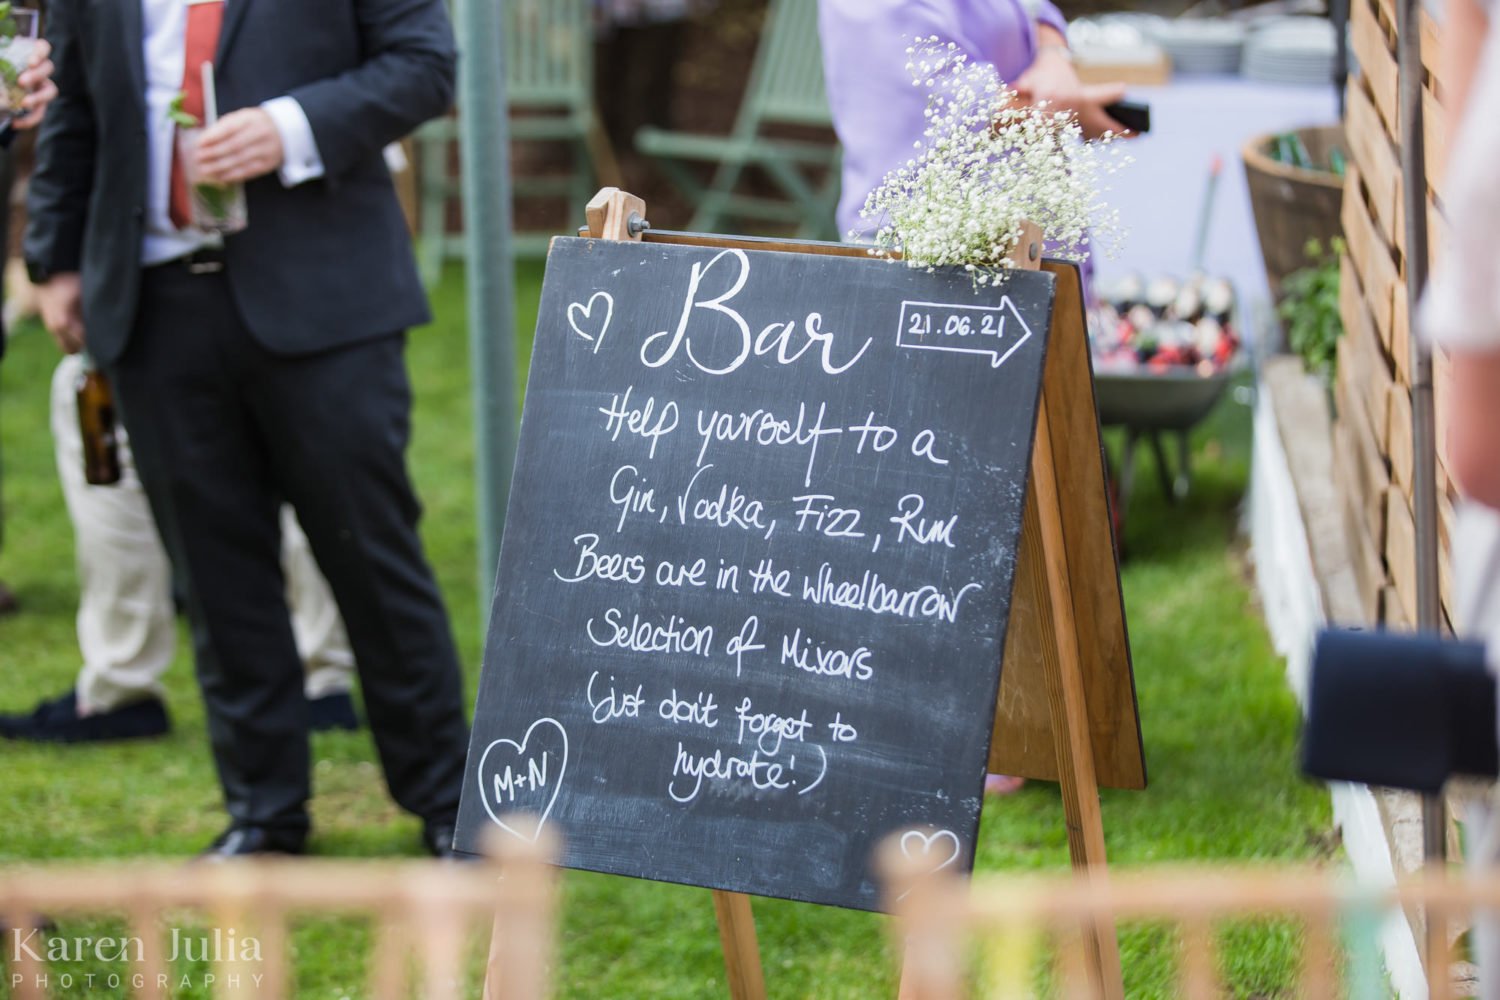 wedding day details featuring signage for guests